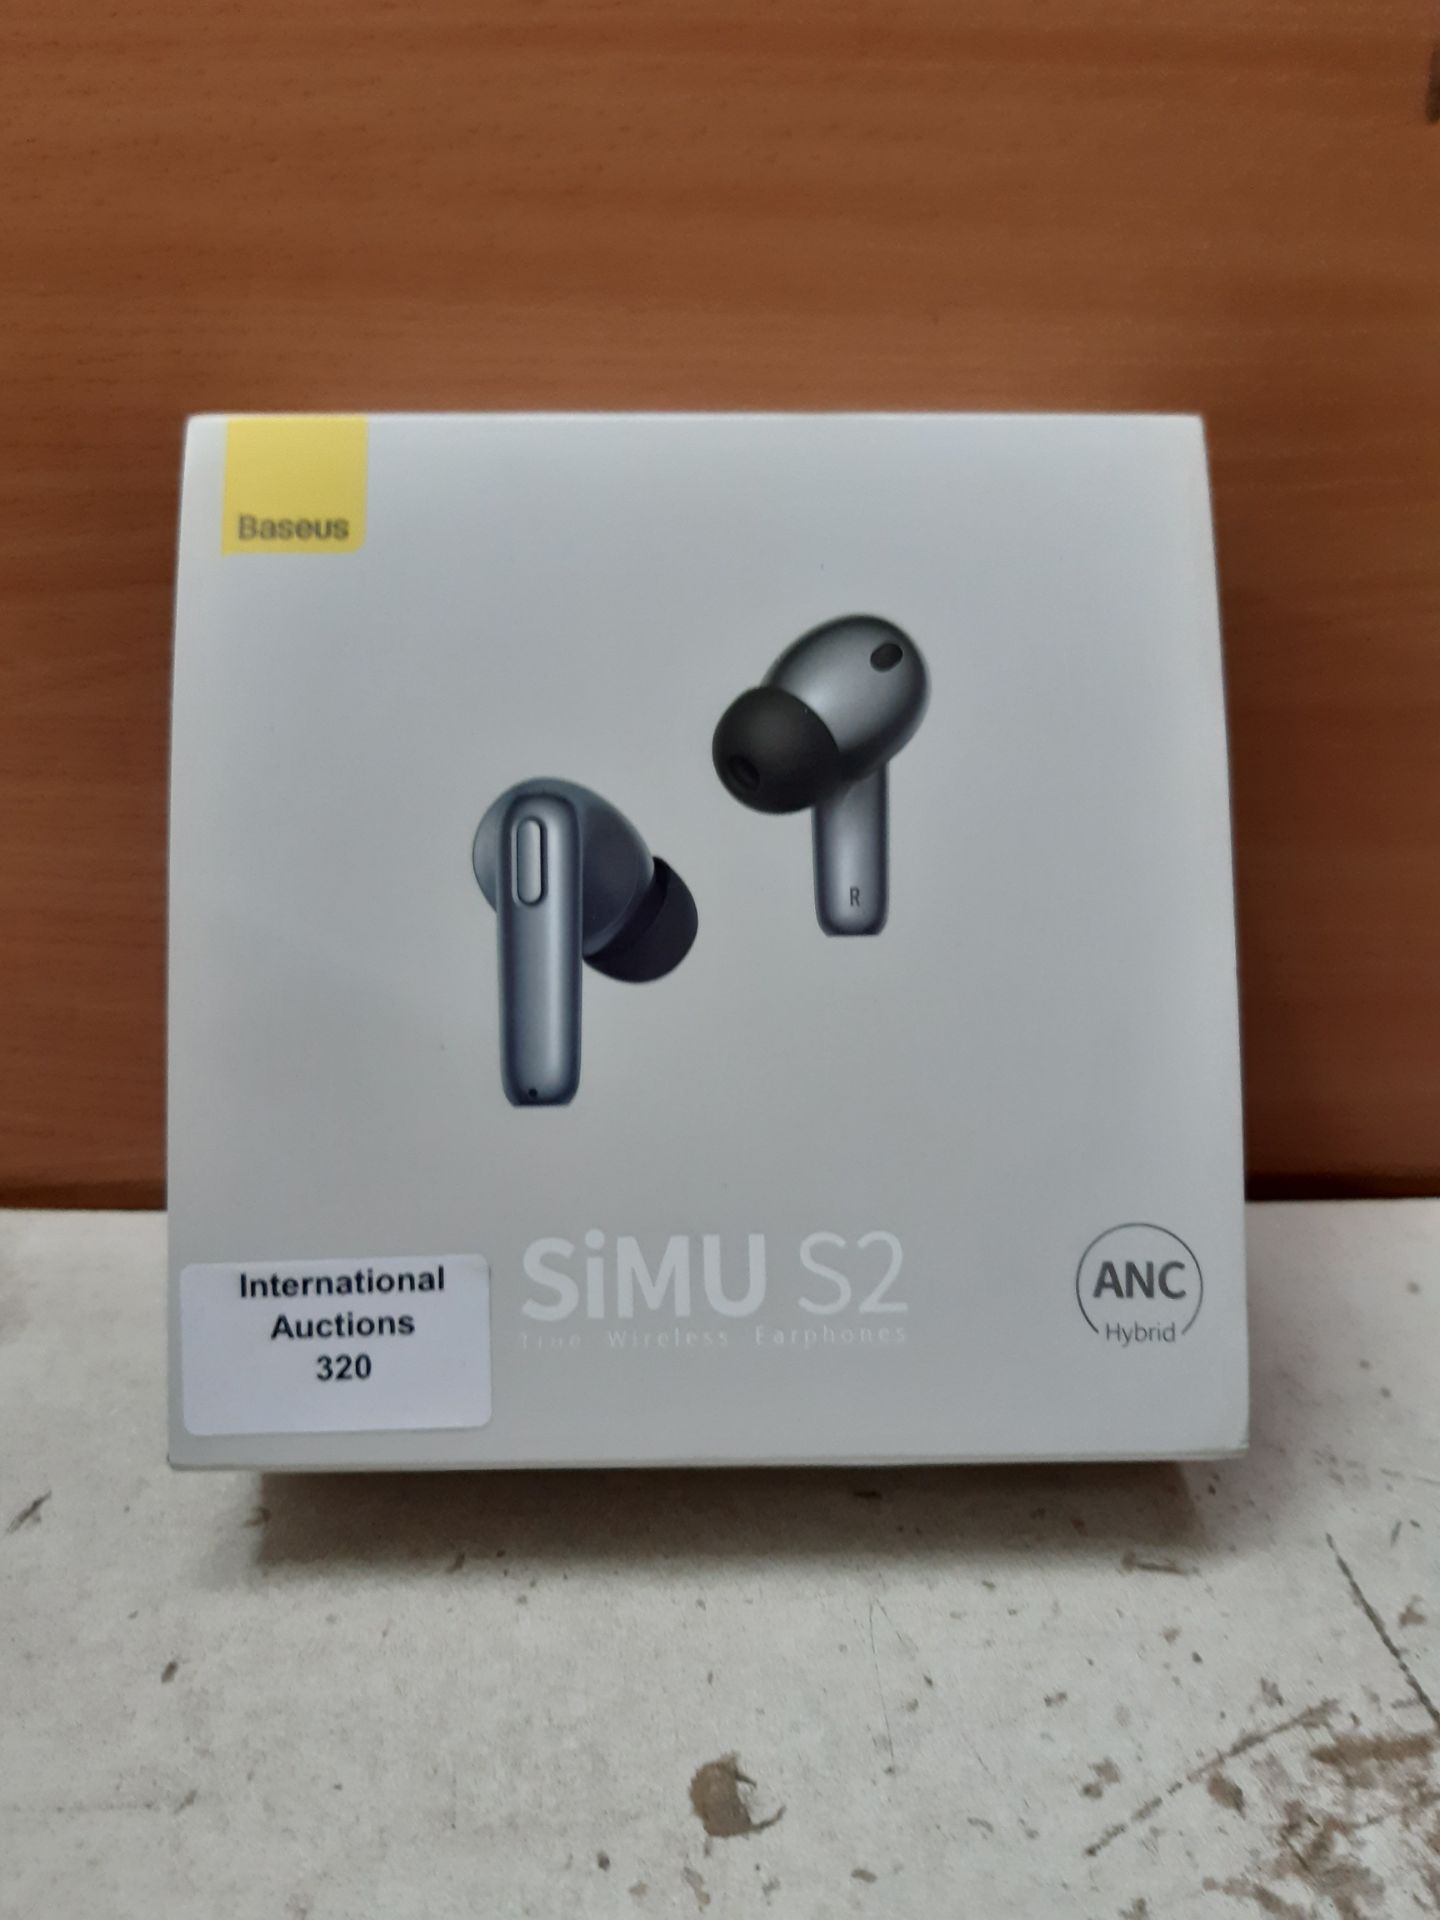 RRP £45.98 Baseus S2 Wireless Earbuds Hybrid Active Noise Cancelling with 6 Mics - Image 2 of 2